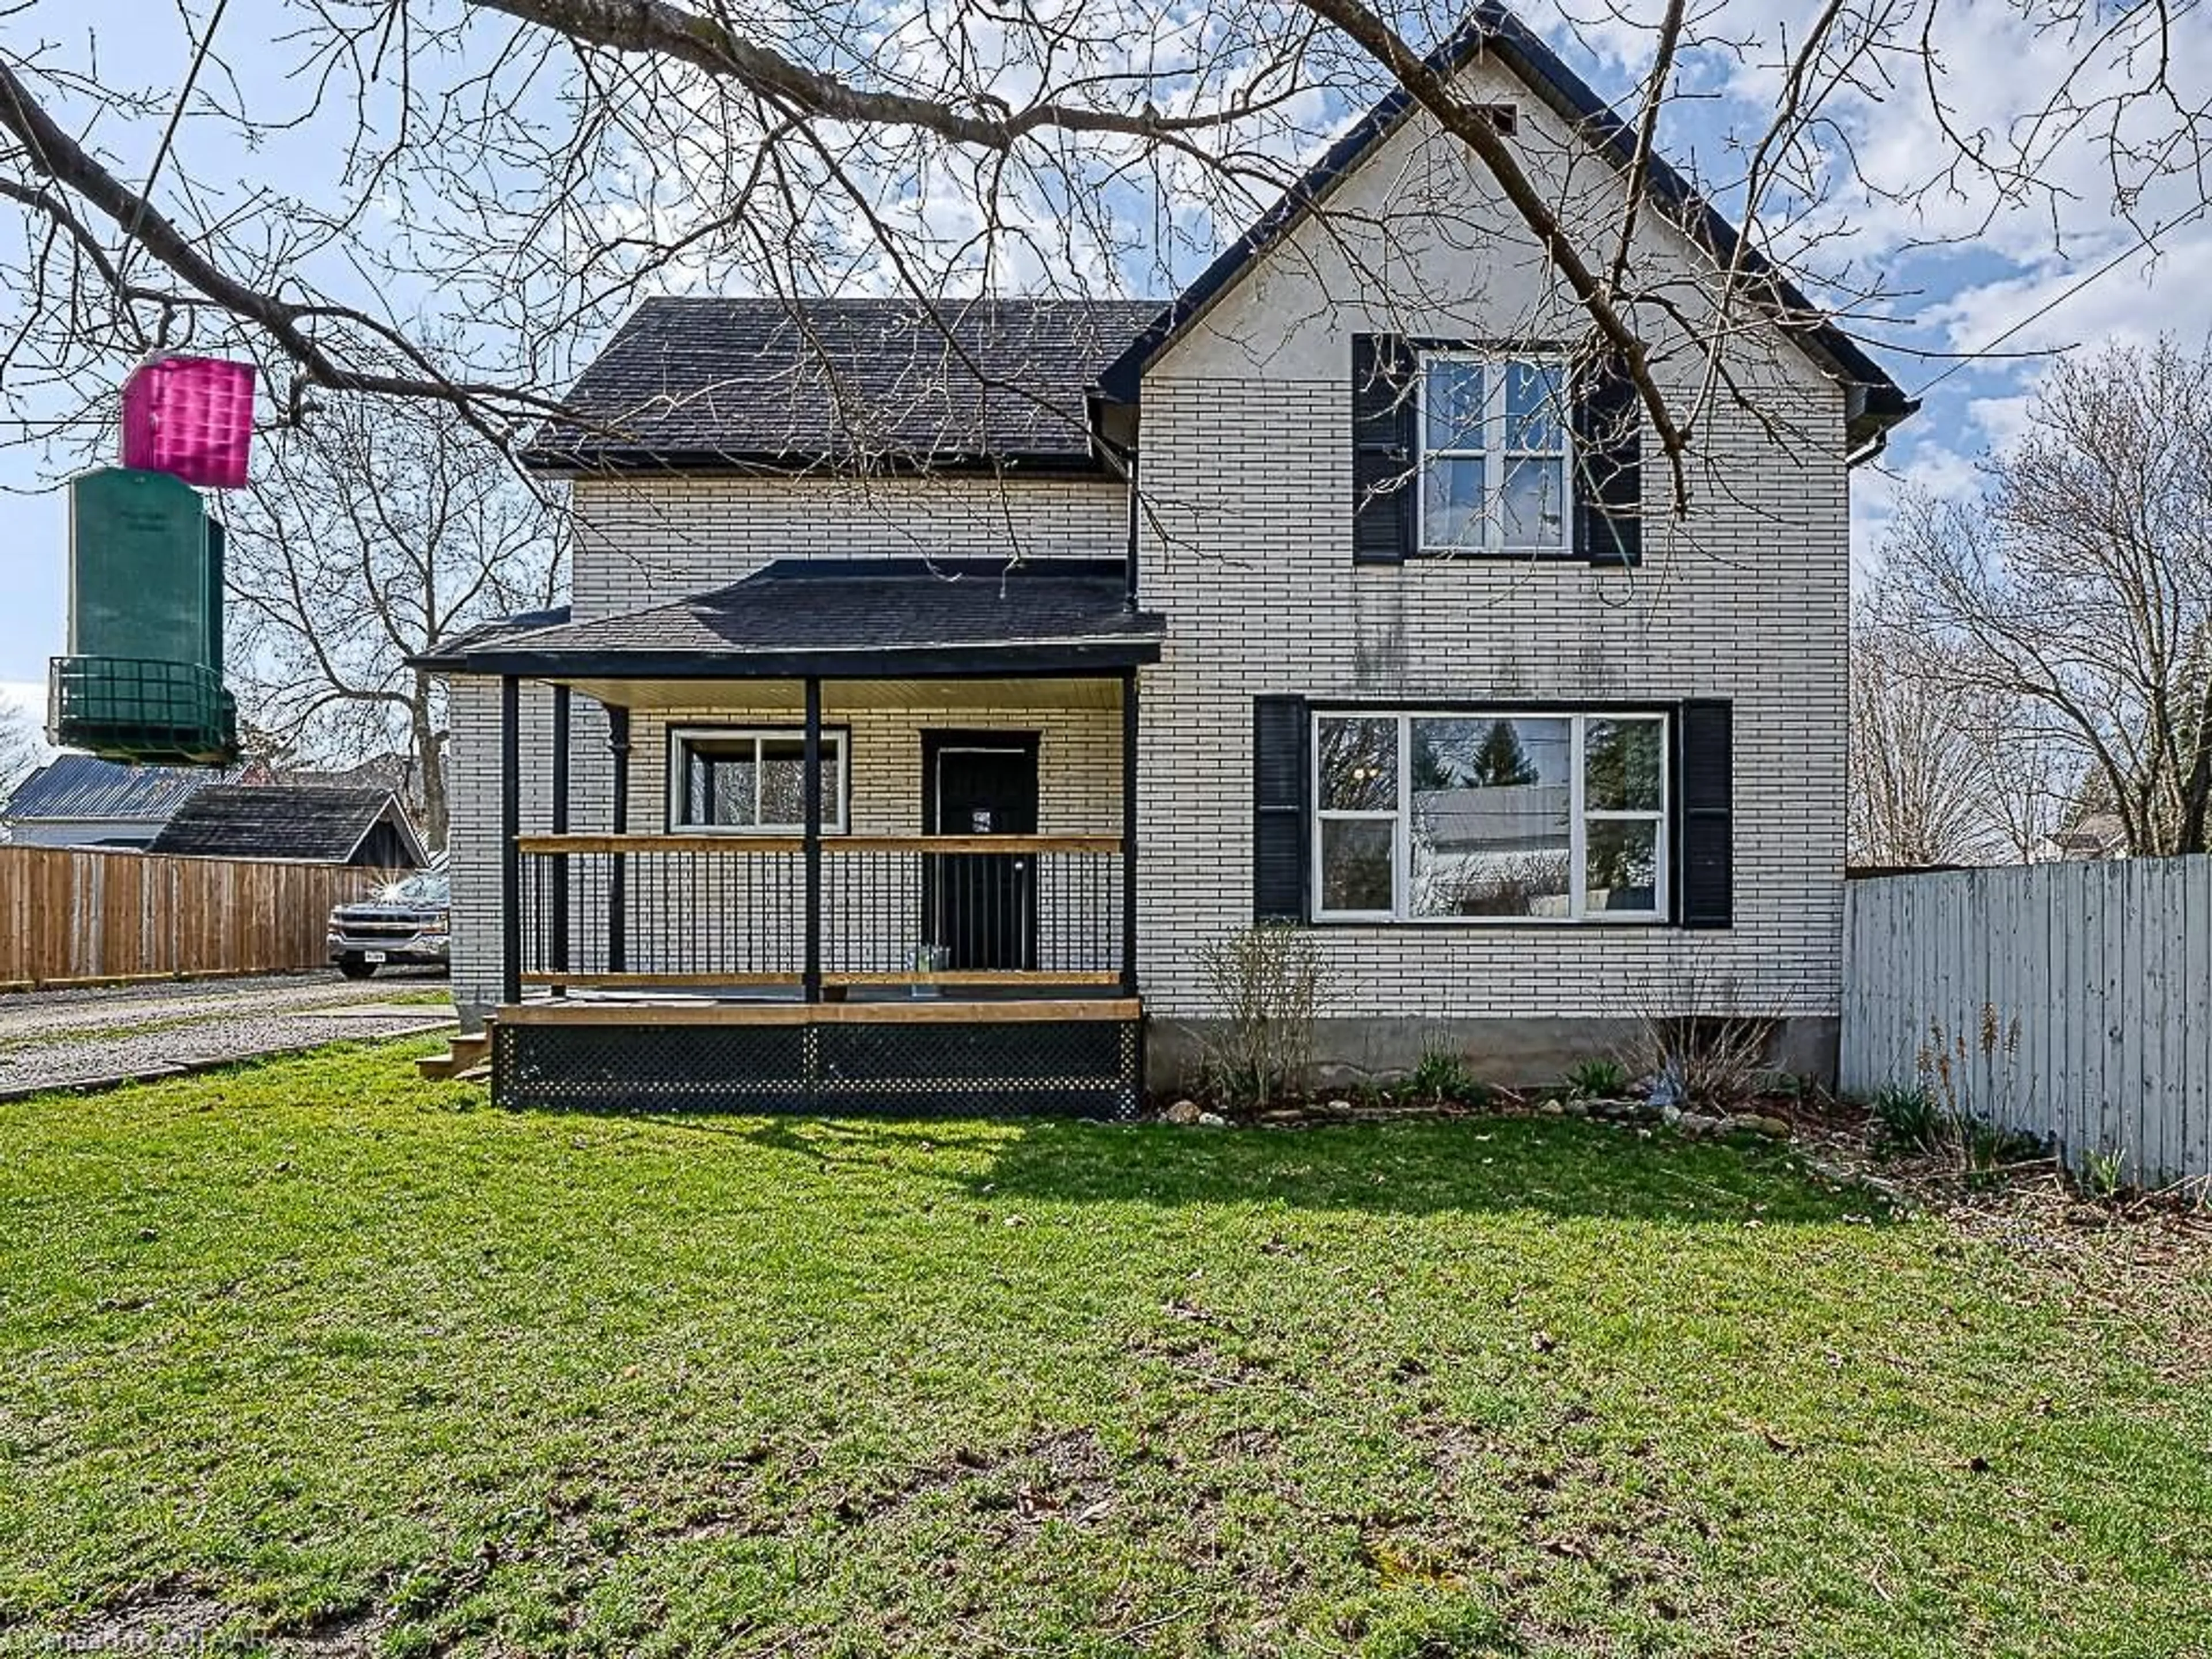 Frontside or backside of a home for 163524 Brownsville Rd, Brownsville Ontario N0L 1C0